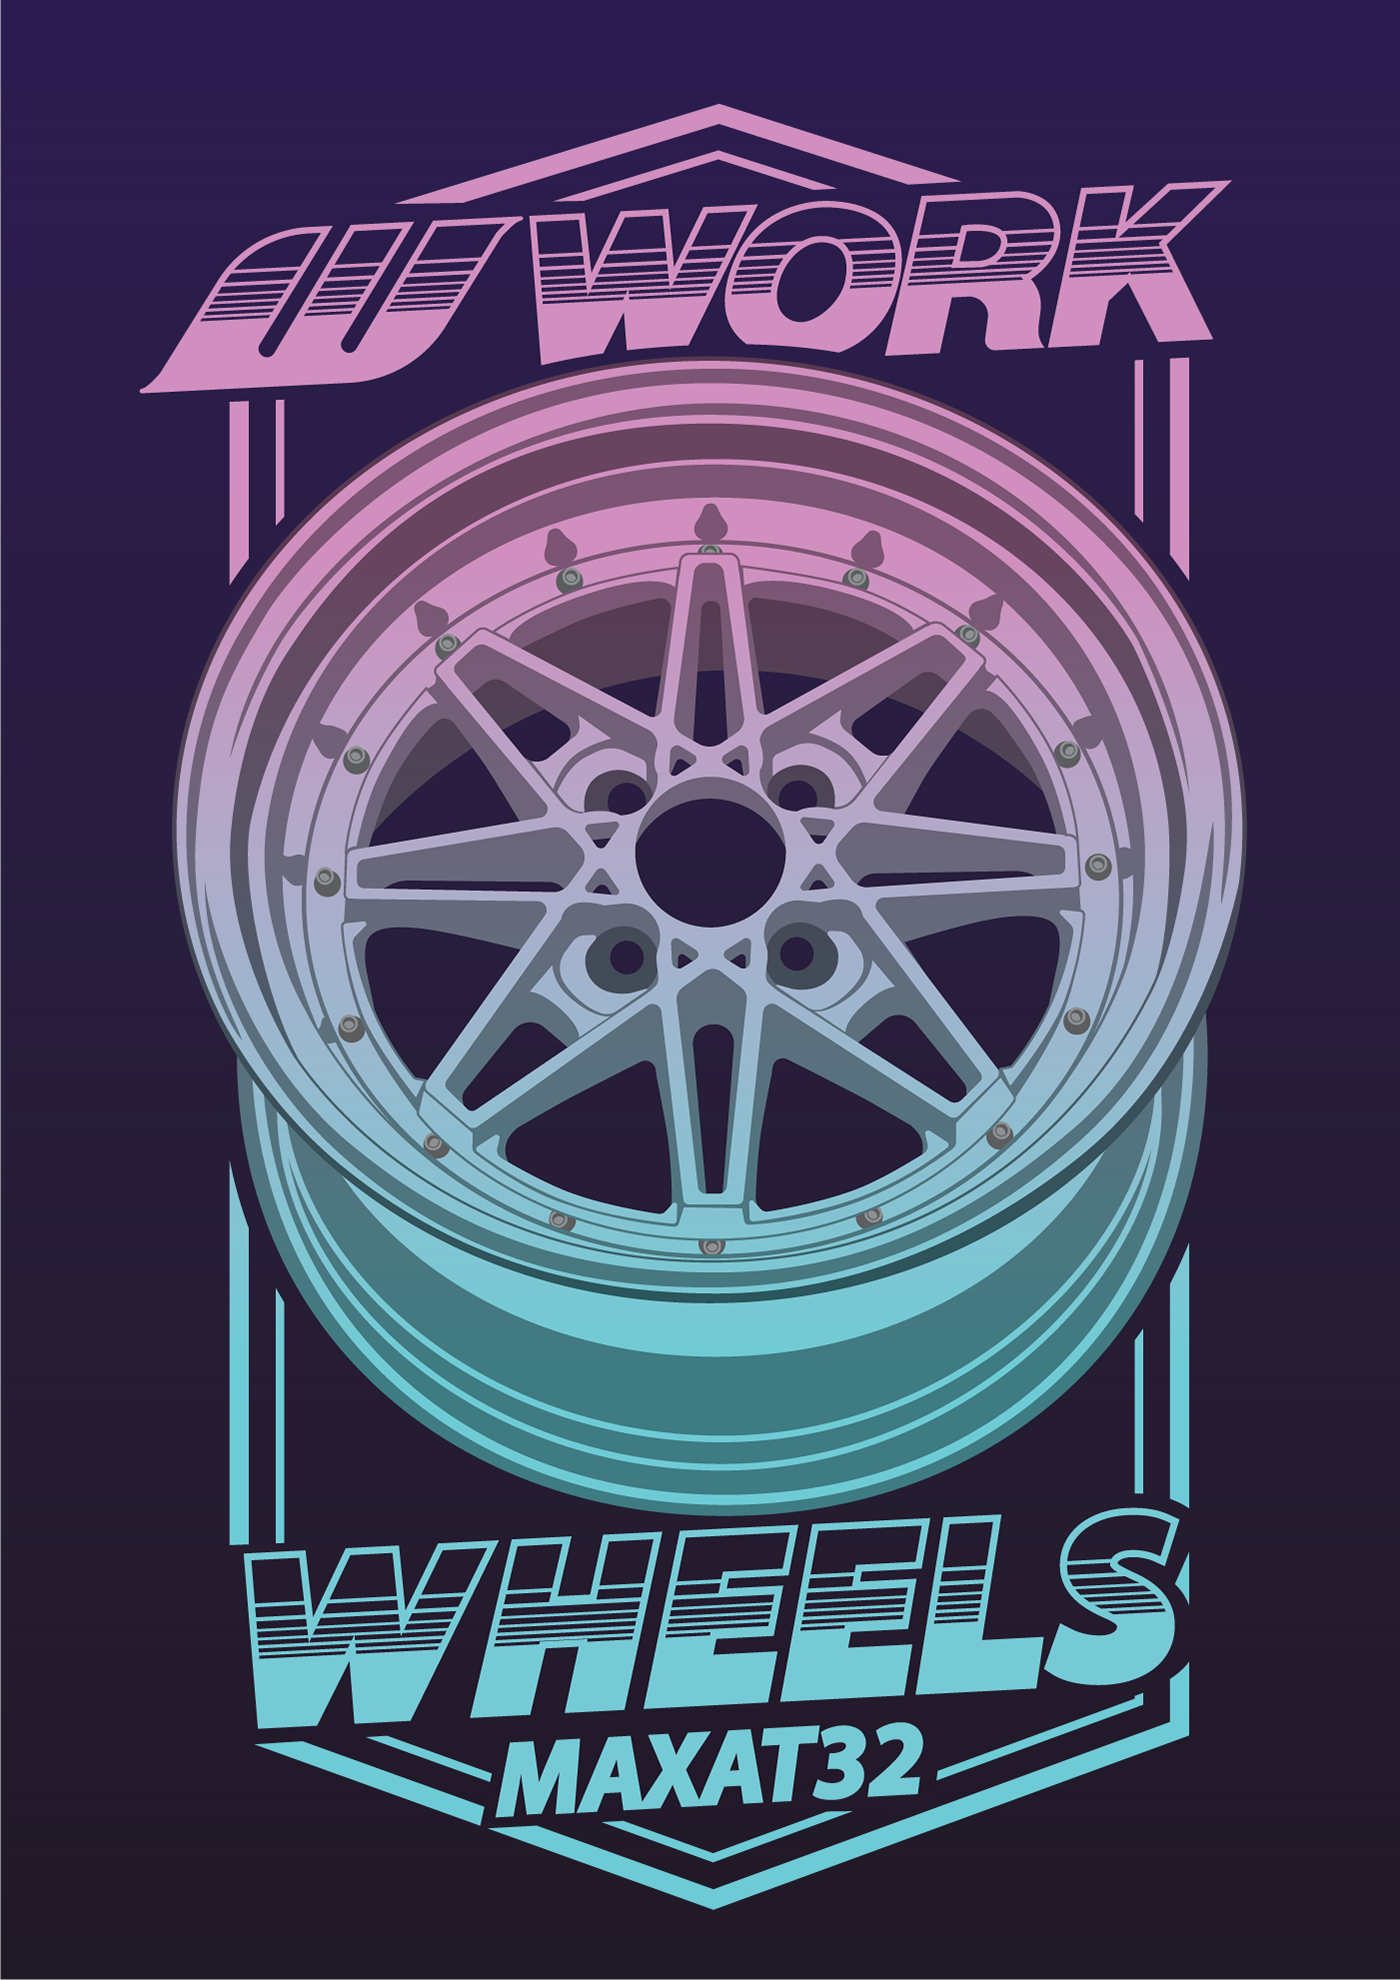 Work  wheels equip Rims stance dropped 80s neon Retro dope